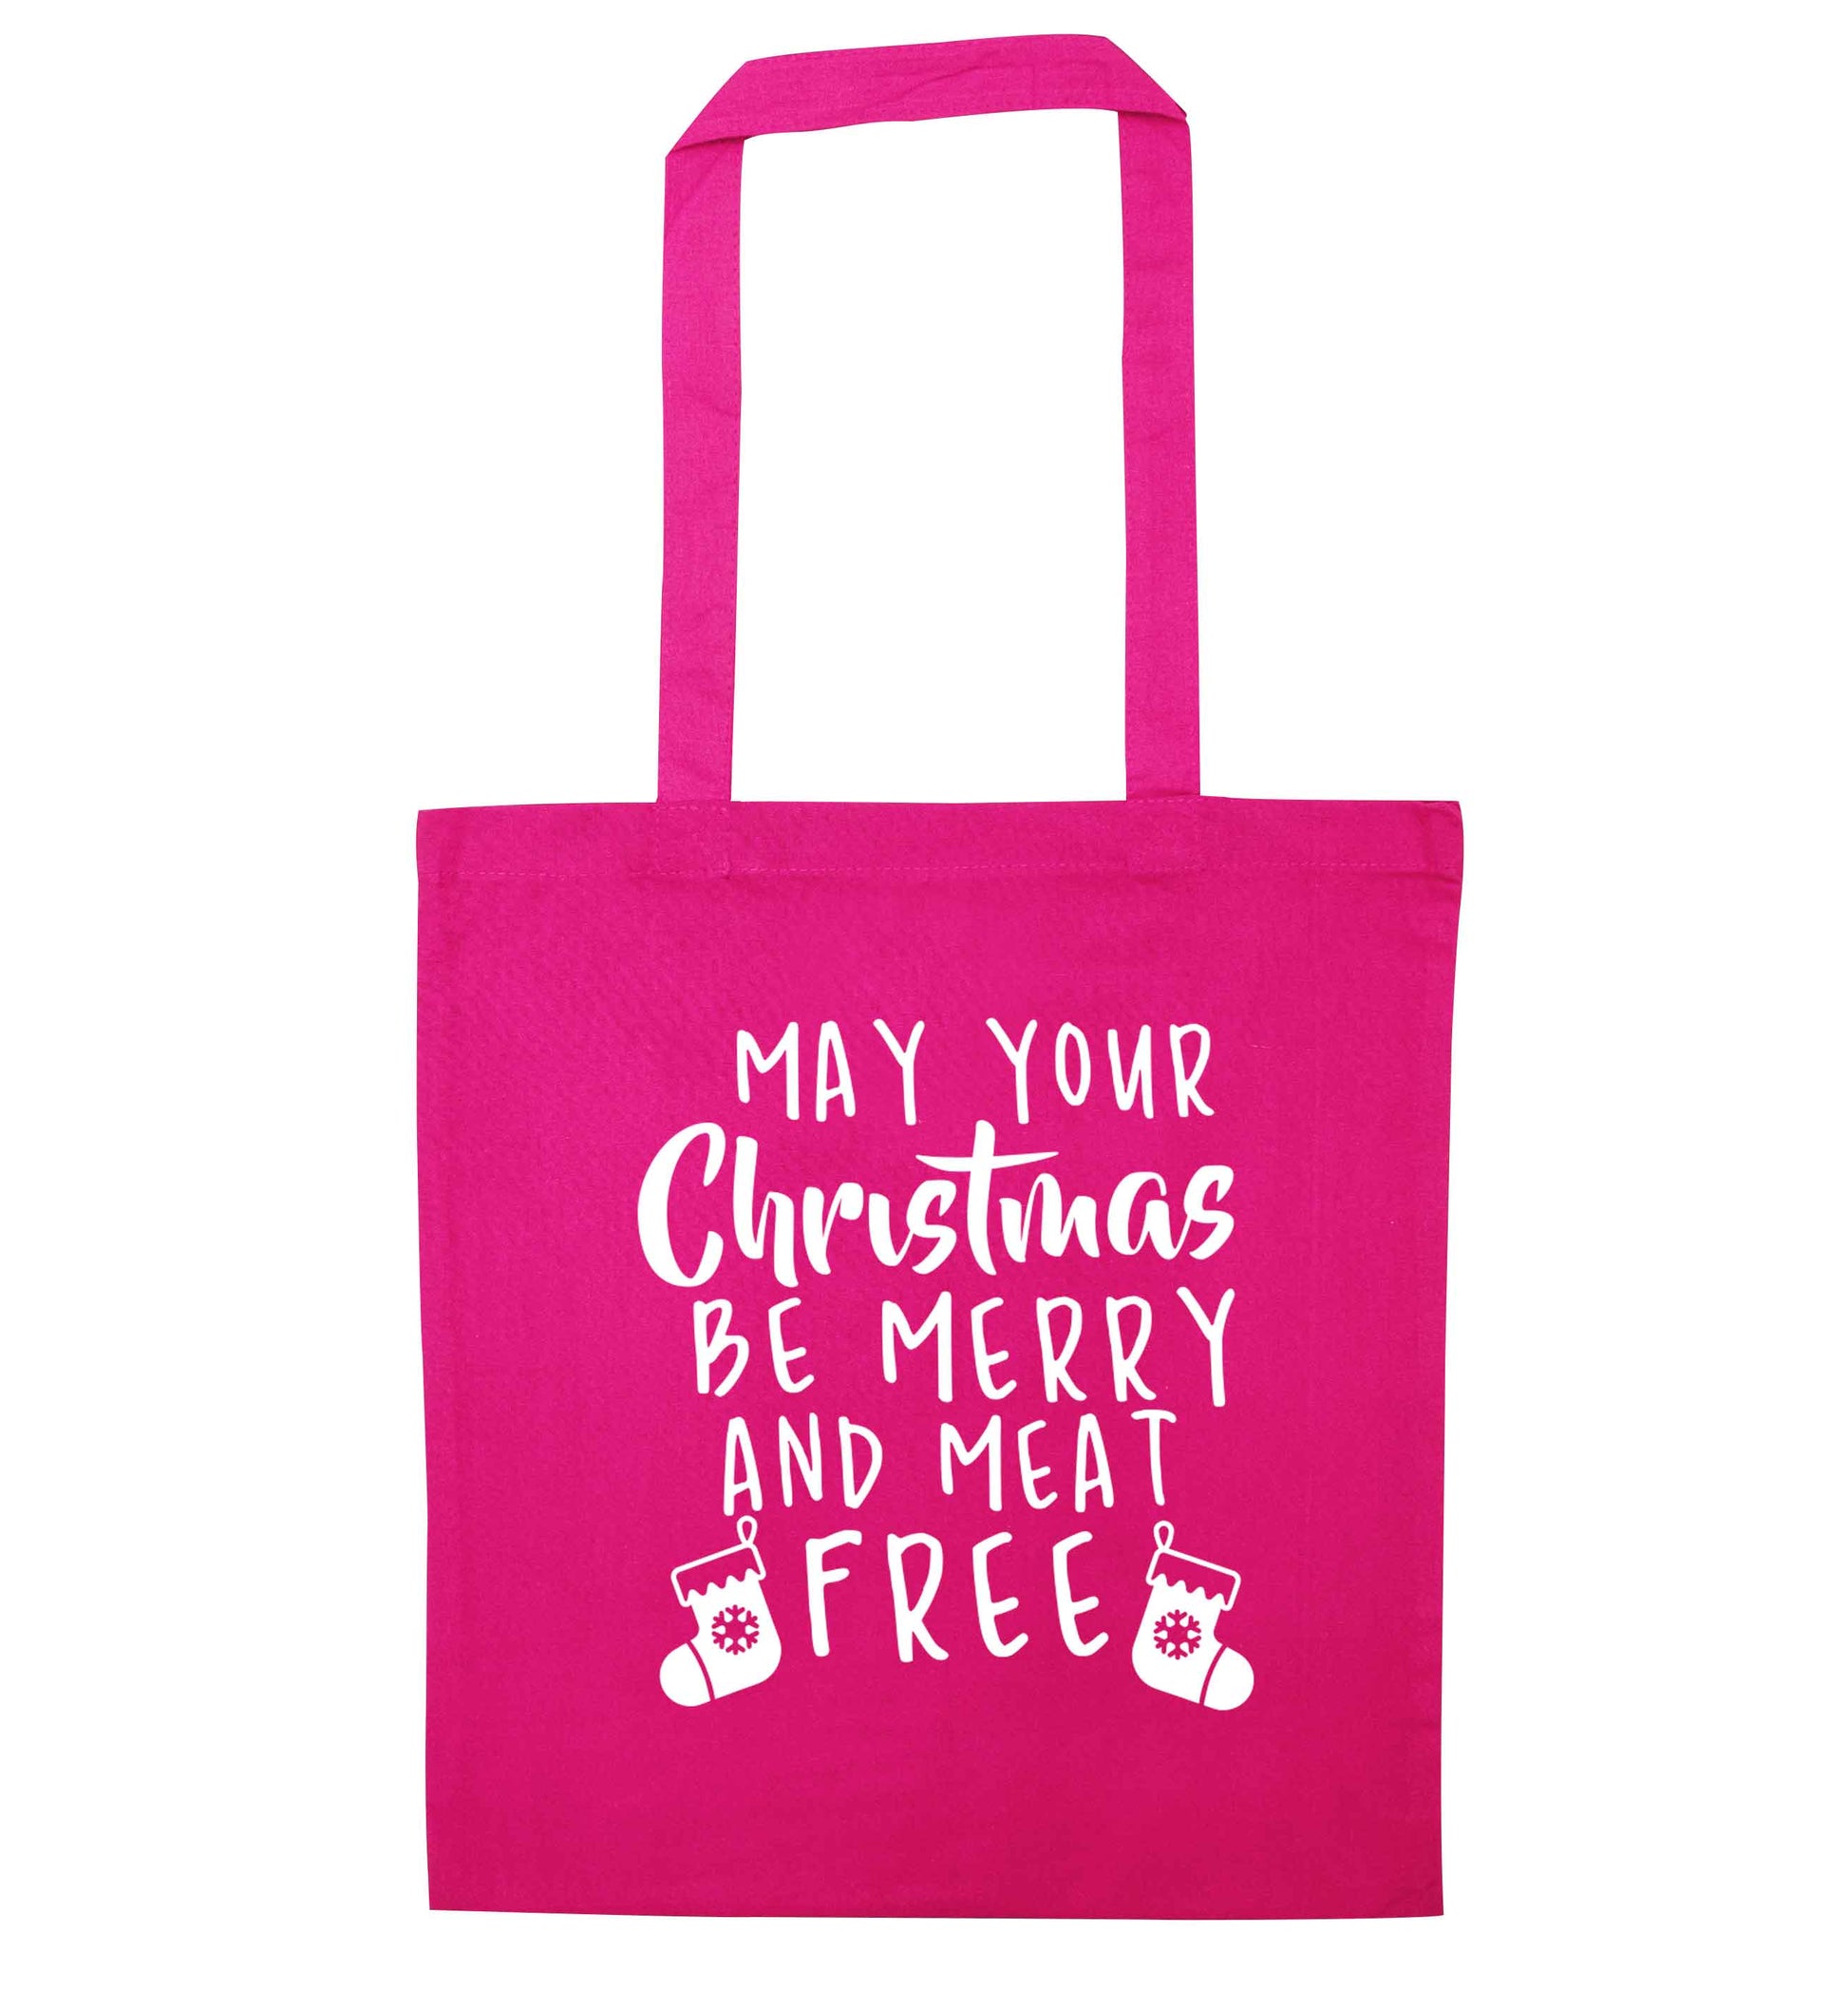 May your Christmas be merry and meat free pink tote bag